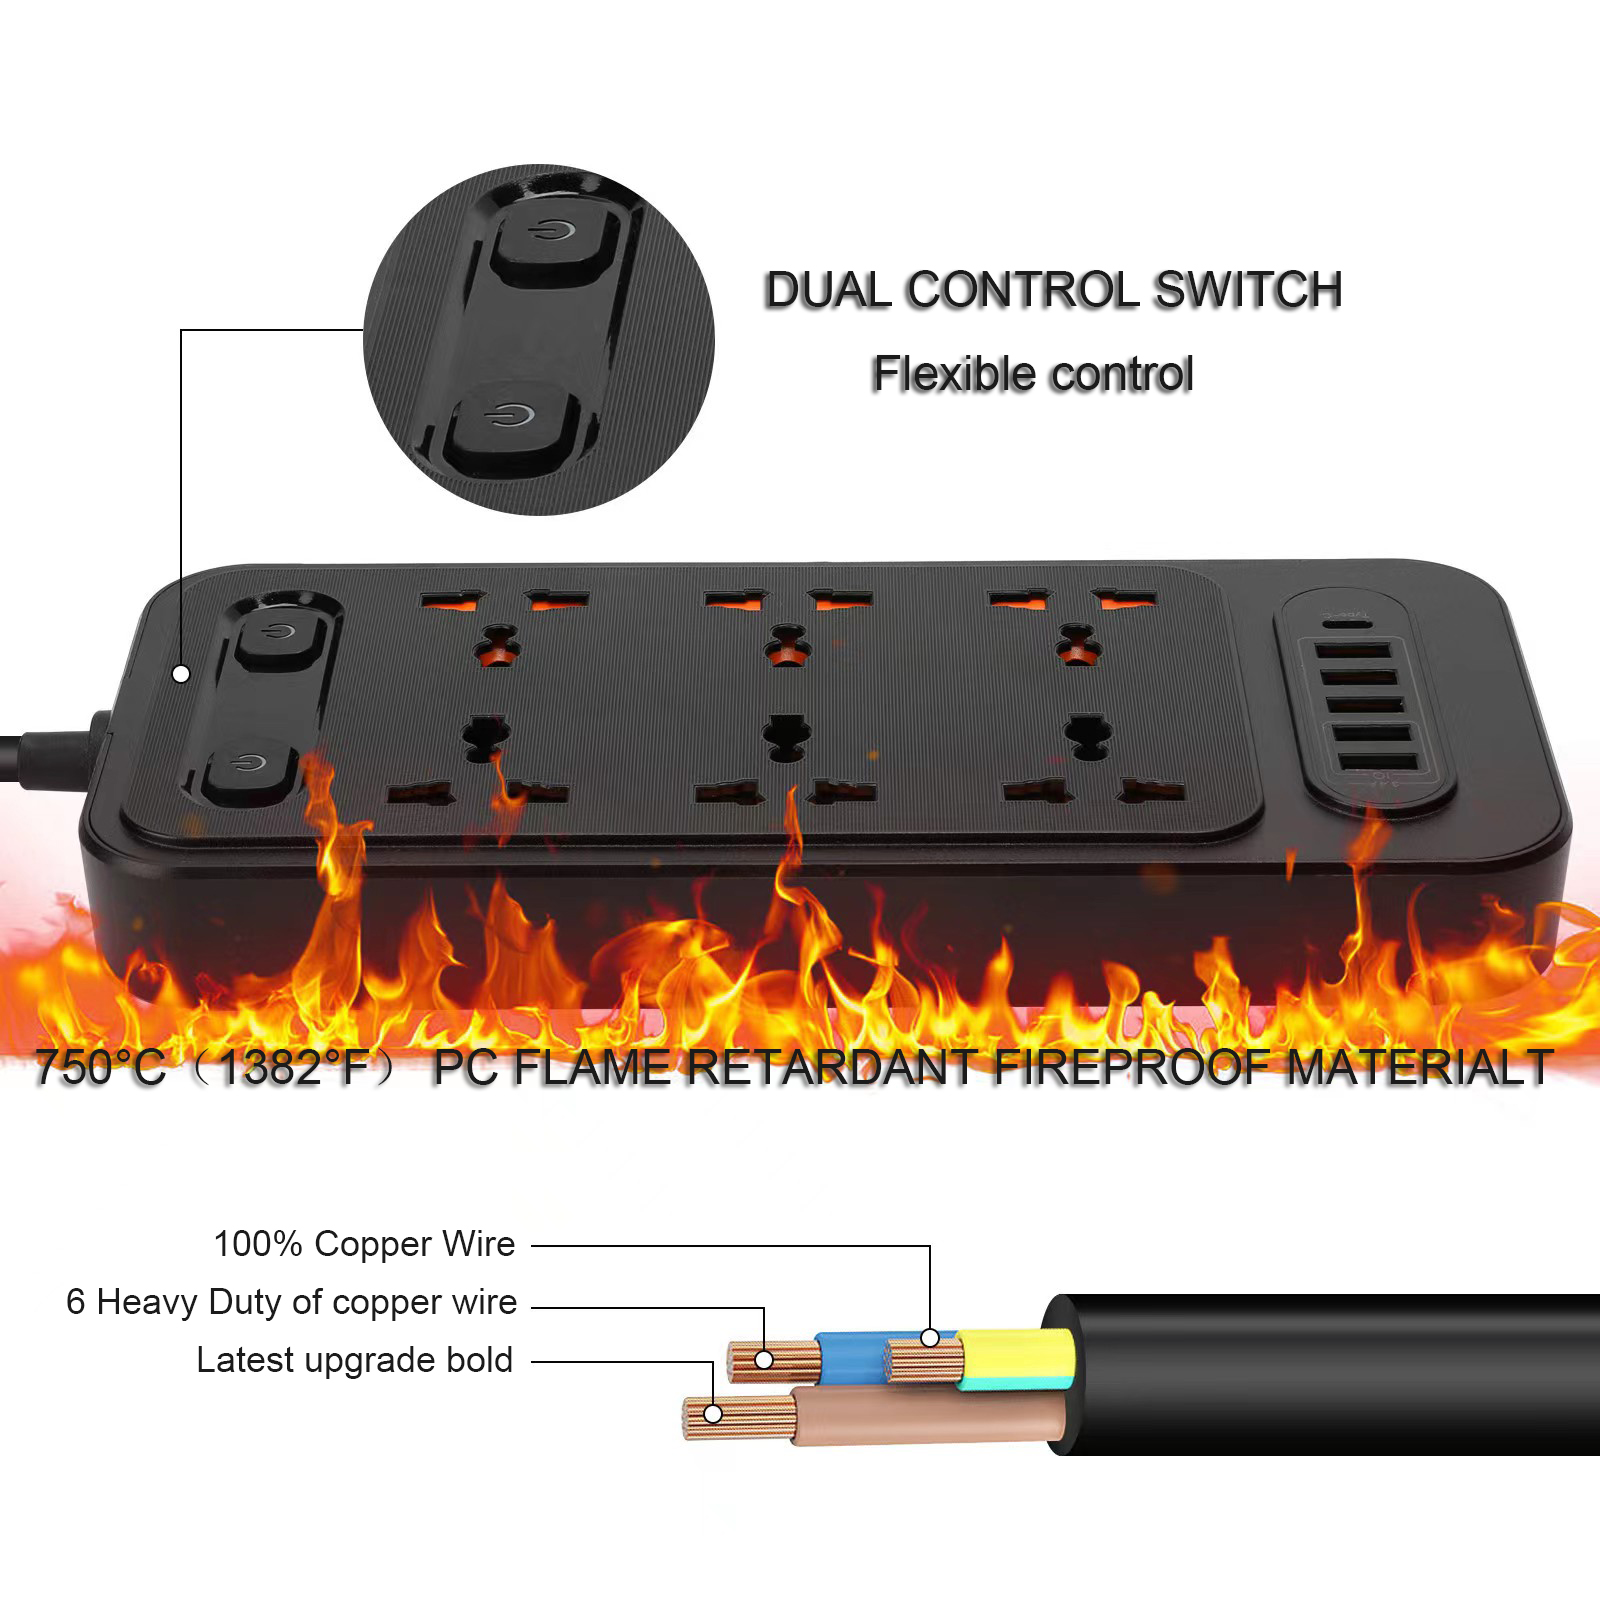 UPS-Power-Protection-Power-Outlet-Strip-6-way-Universal-Multi-Socket-AU-Plug-with-USB-TYPE-C-Ports-Fast-Charging-Electrical-Sockets-Flame-Retardant-Socket-Adapter-2023NEW-36